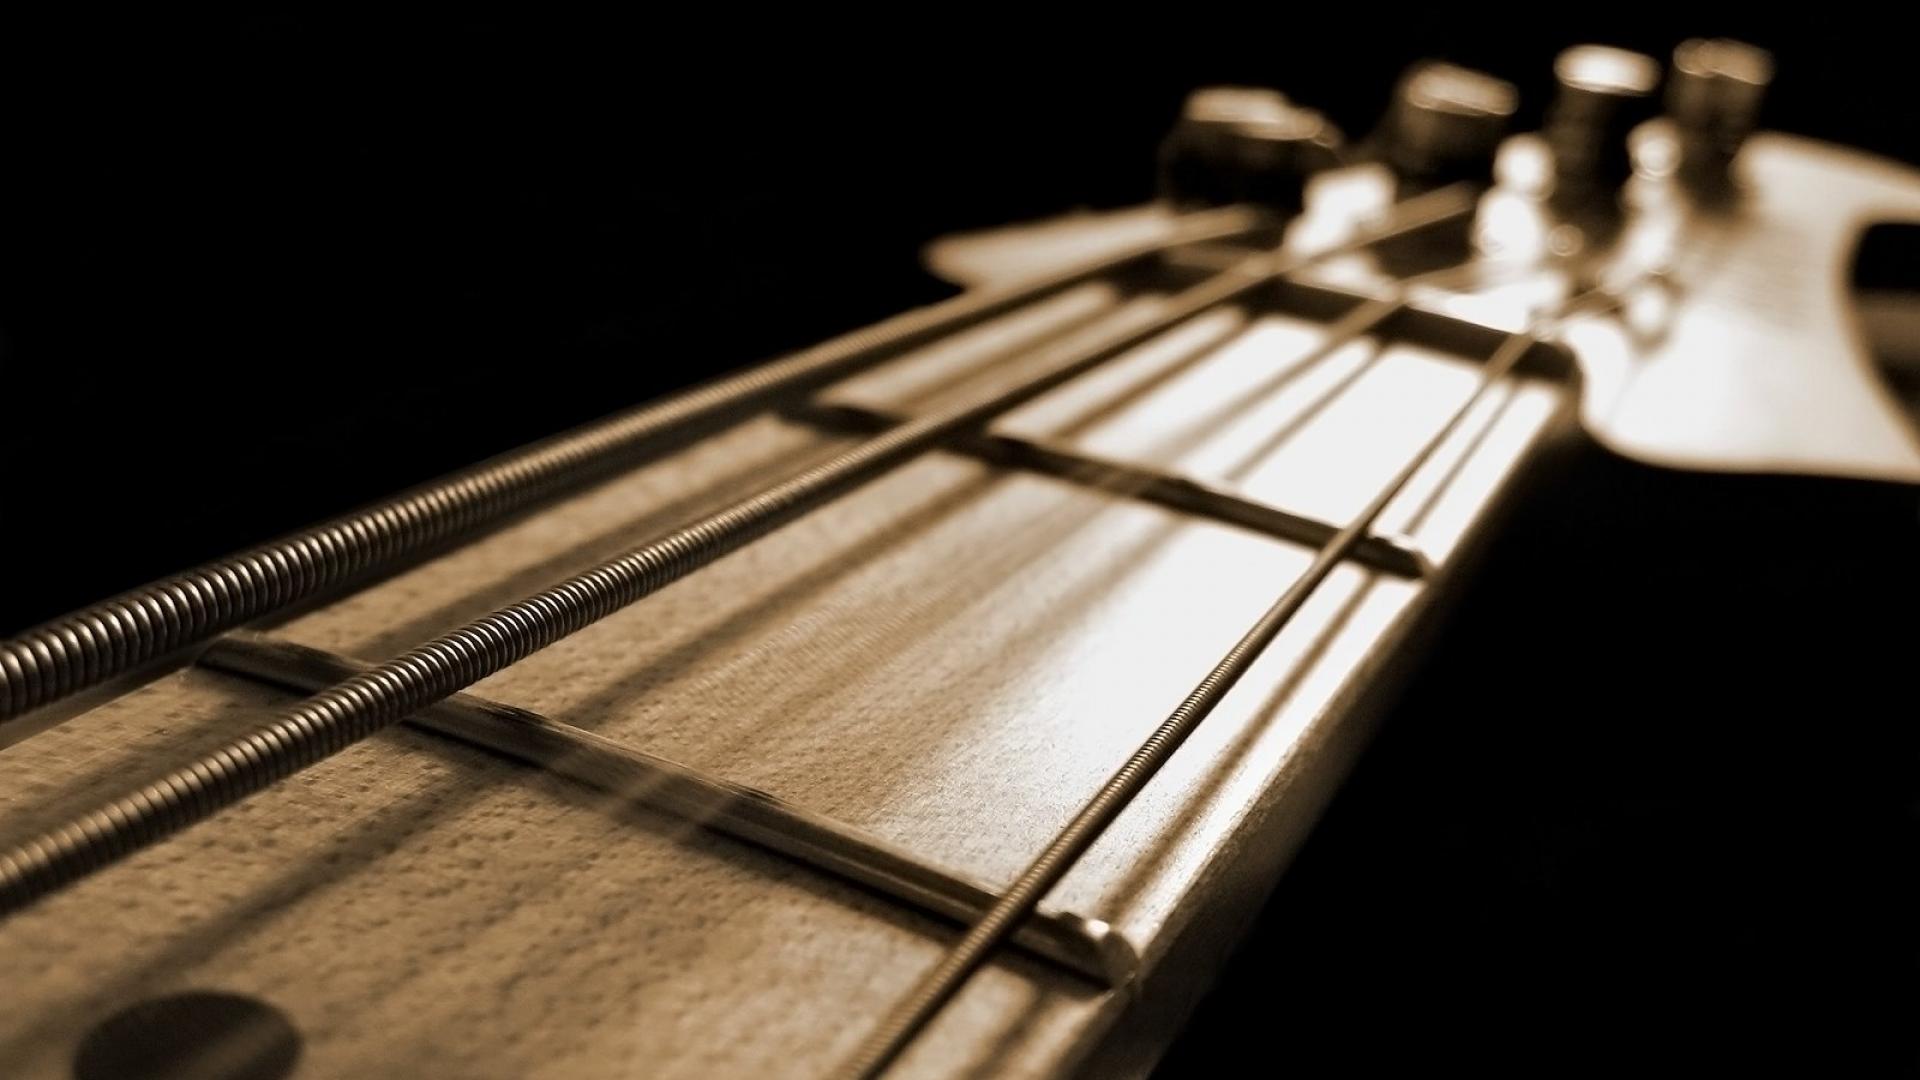 wallpaper hd 1080p free download for mobile,string instrument,musical instrument,string instrument,plucked string instruments,musical instrument accessory